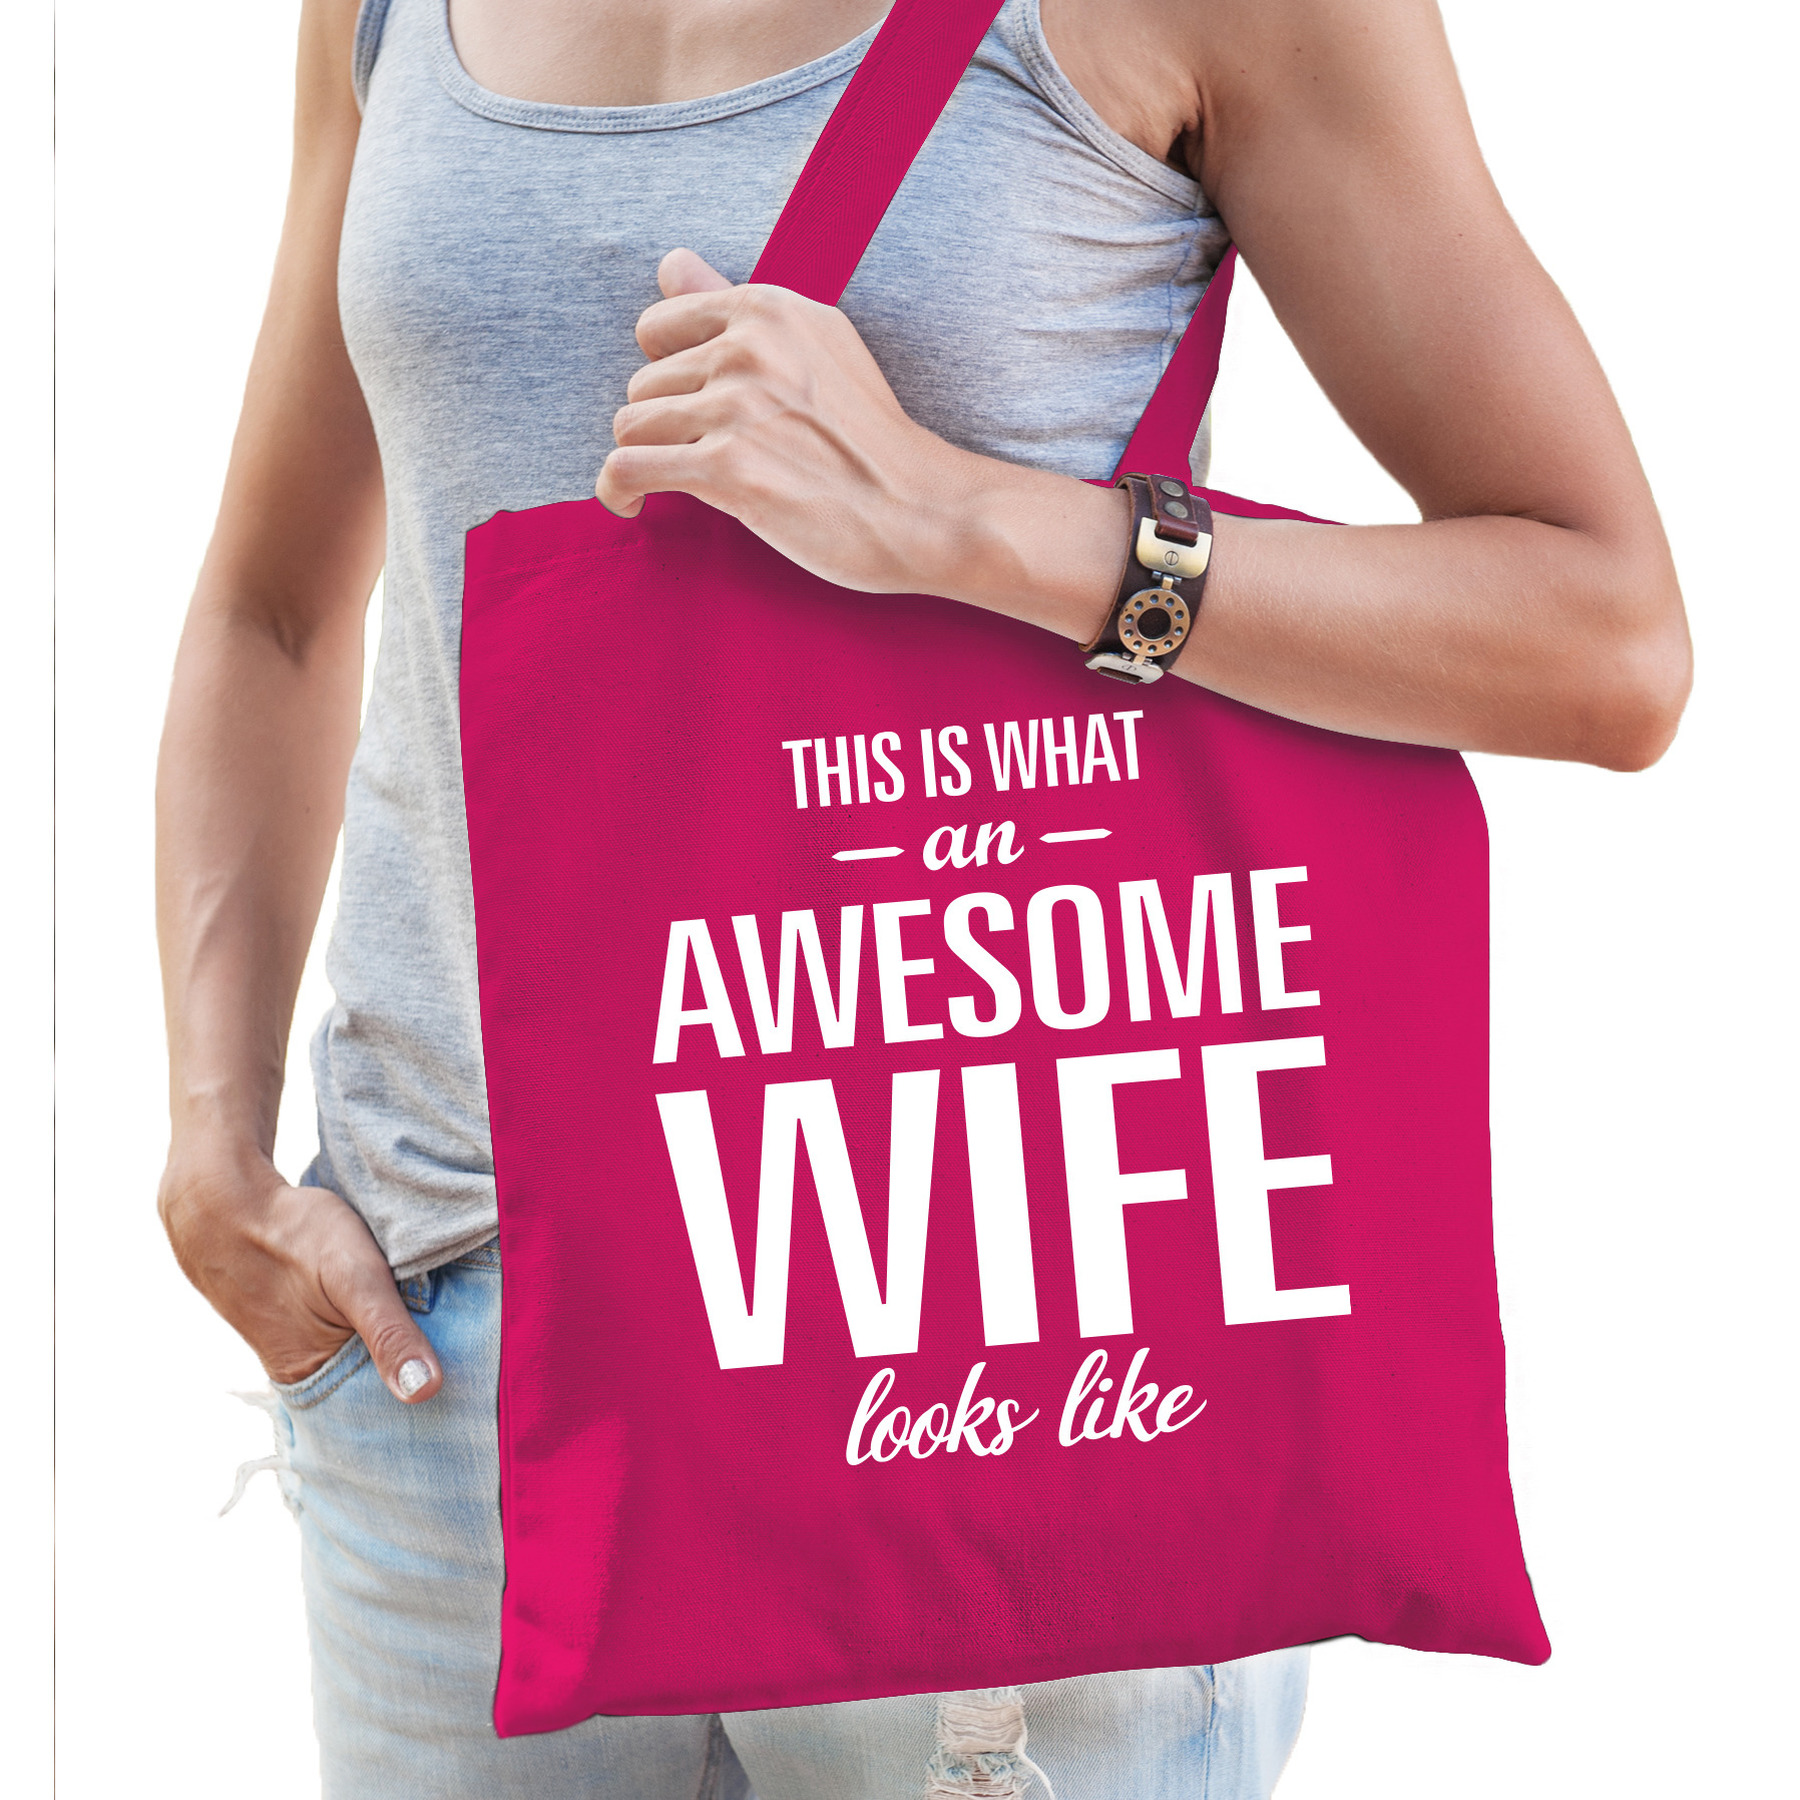 Awesome wife-vrouw cadeau tas roze voor dames